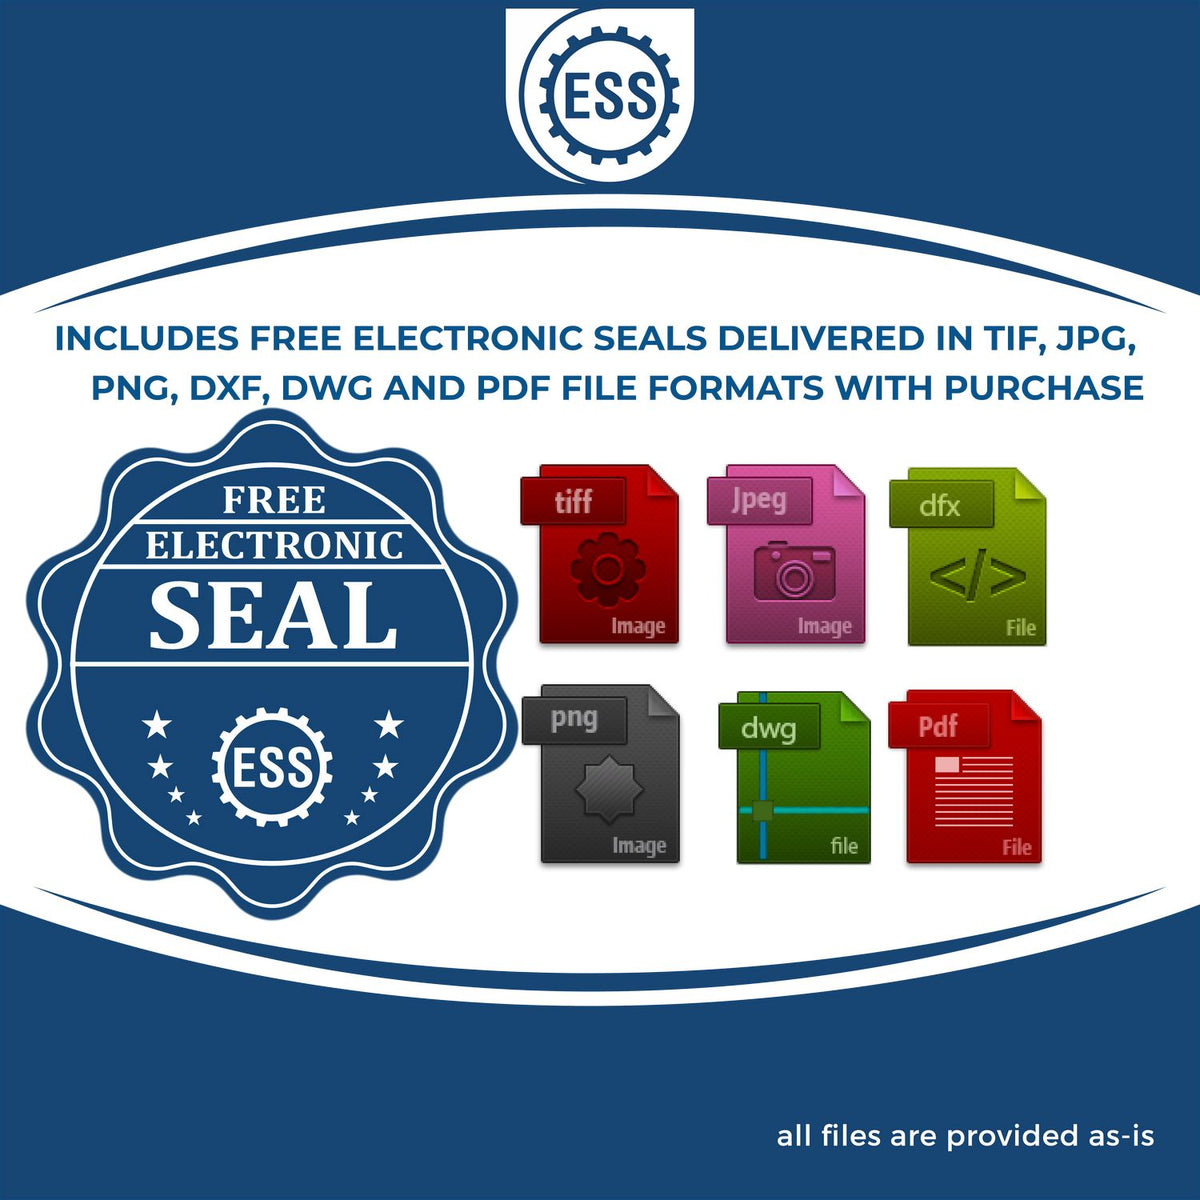 An infographic for the free electronic seal for the State of Colorado Long Reach Architectural Embossing Seal illustrating the different file type icons such as DXF, DWG, TIF, JPG and PNG.